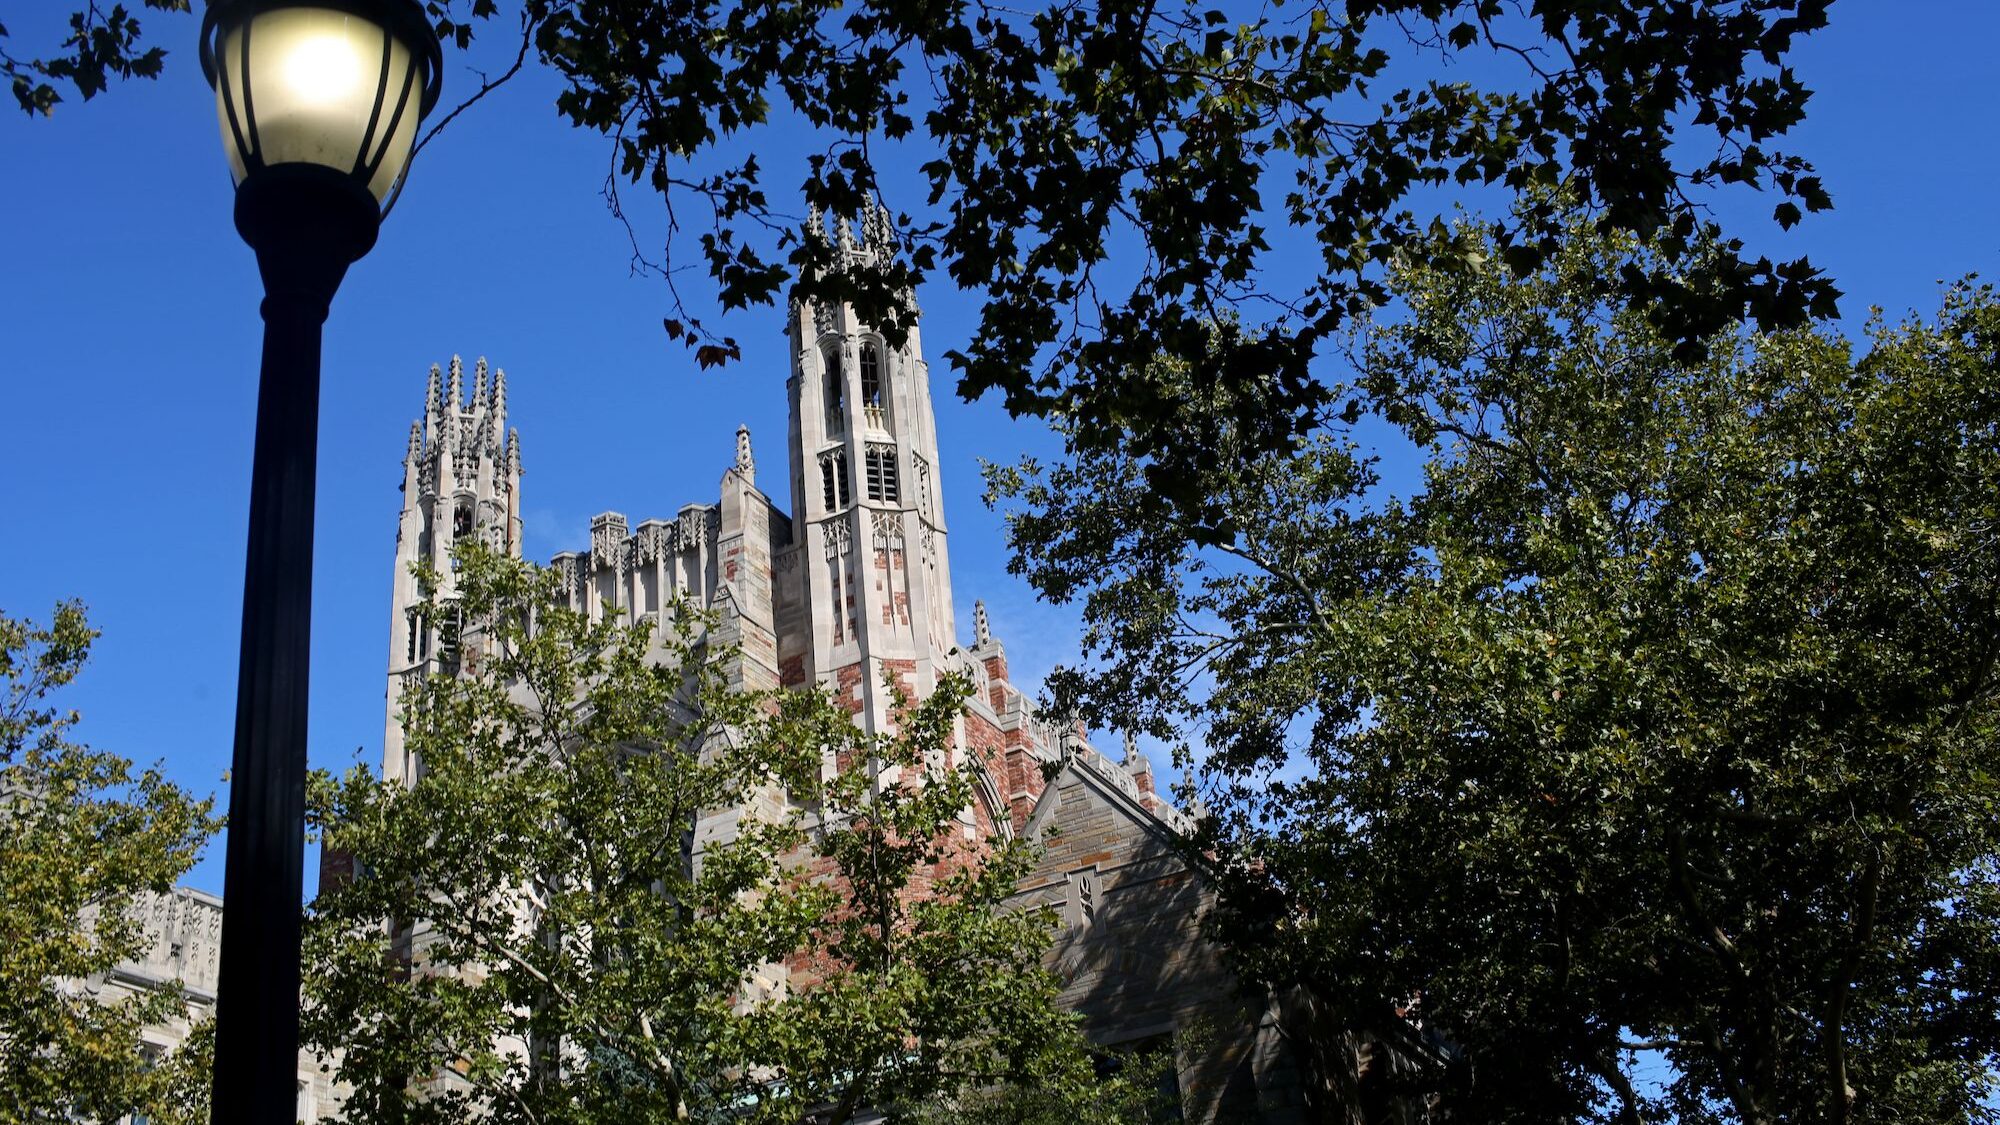 Outside of the Yale University Law School is pictured on September 27, 2018 in New Haven, Connectic...